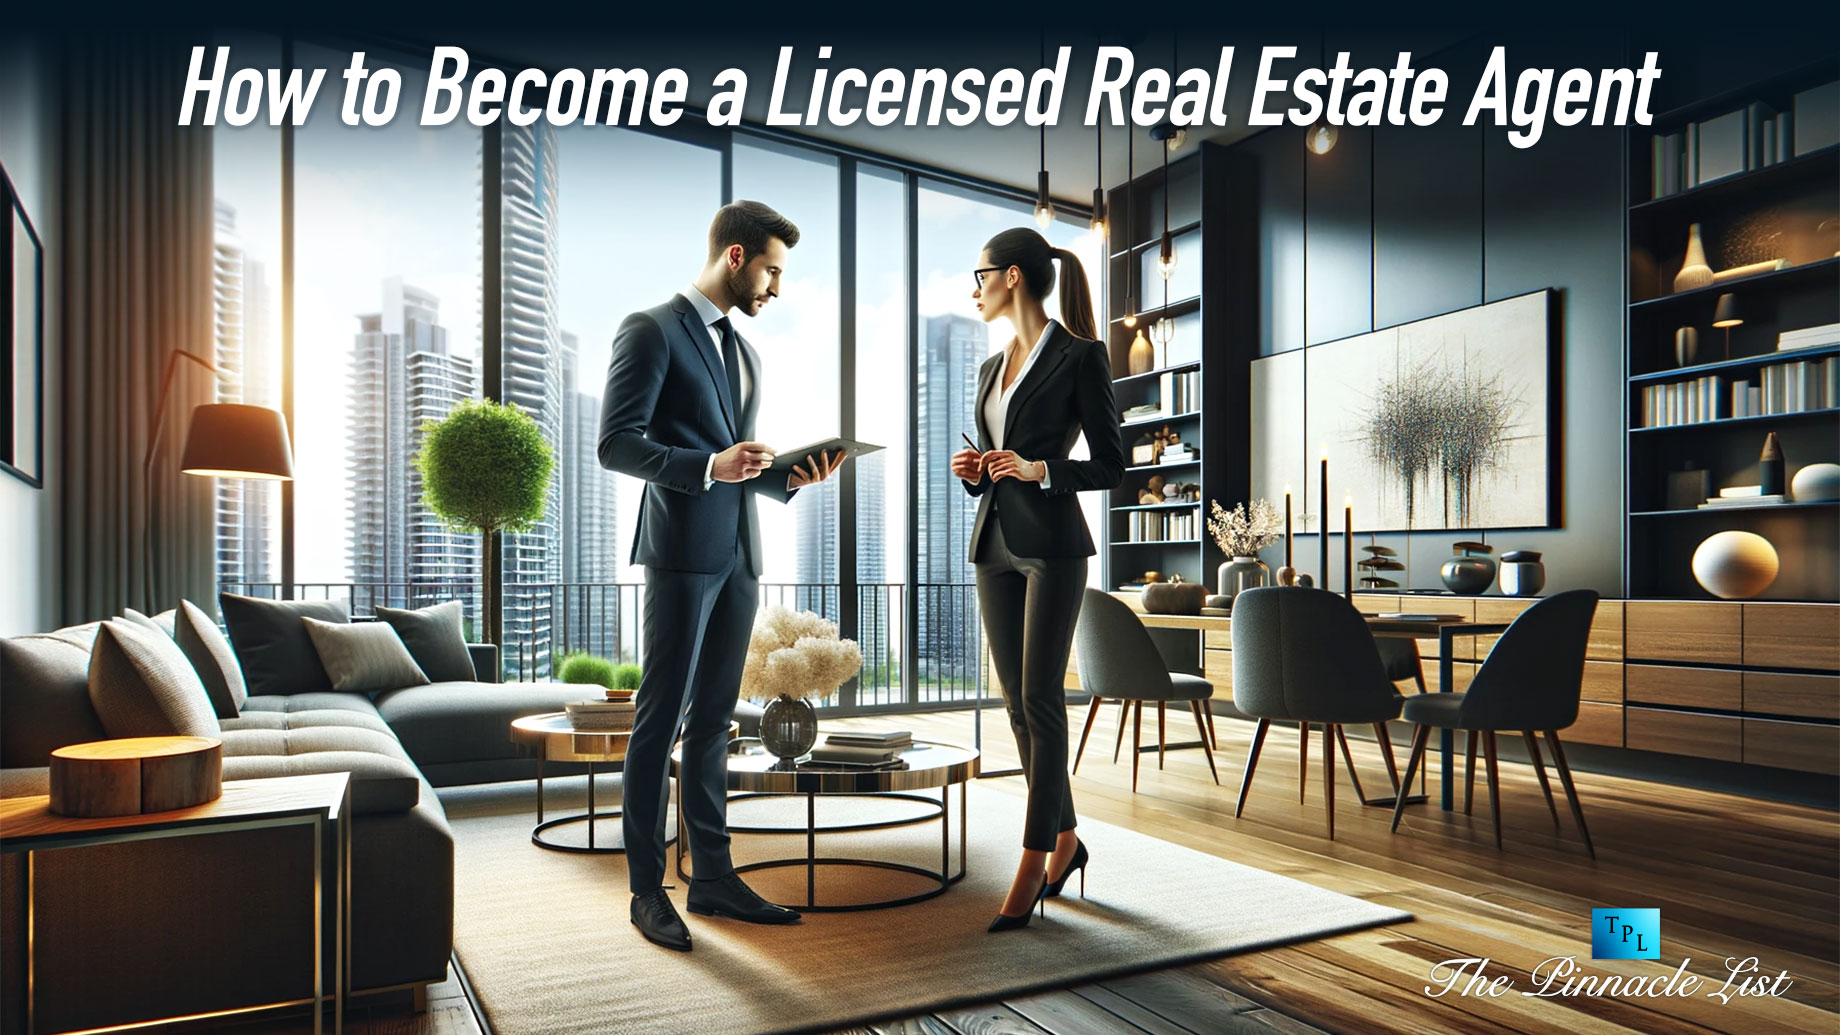 How to Become a Licensed Real Estate Agent